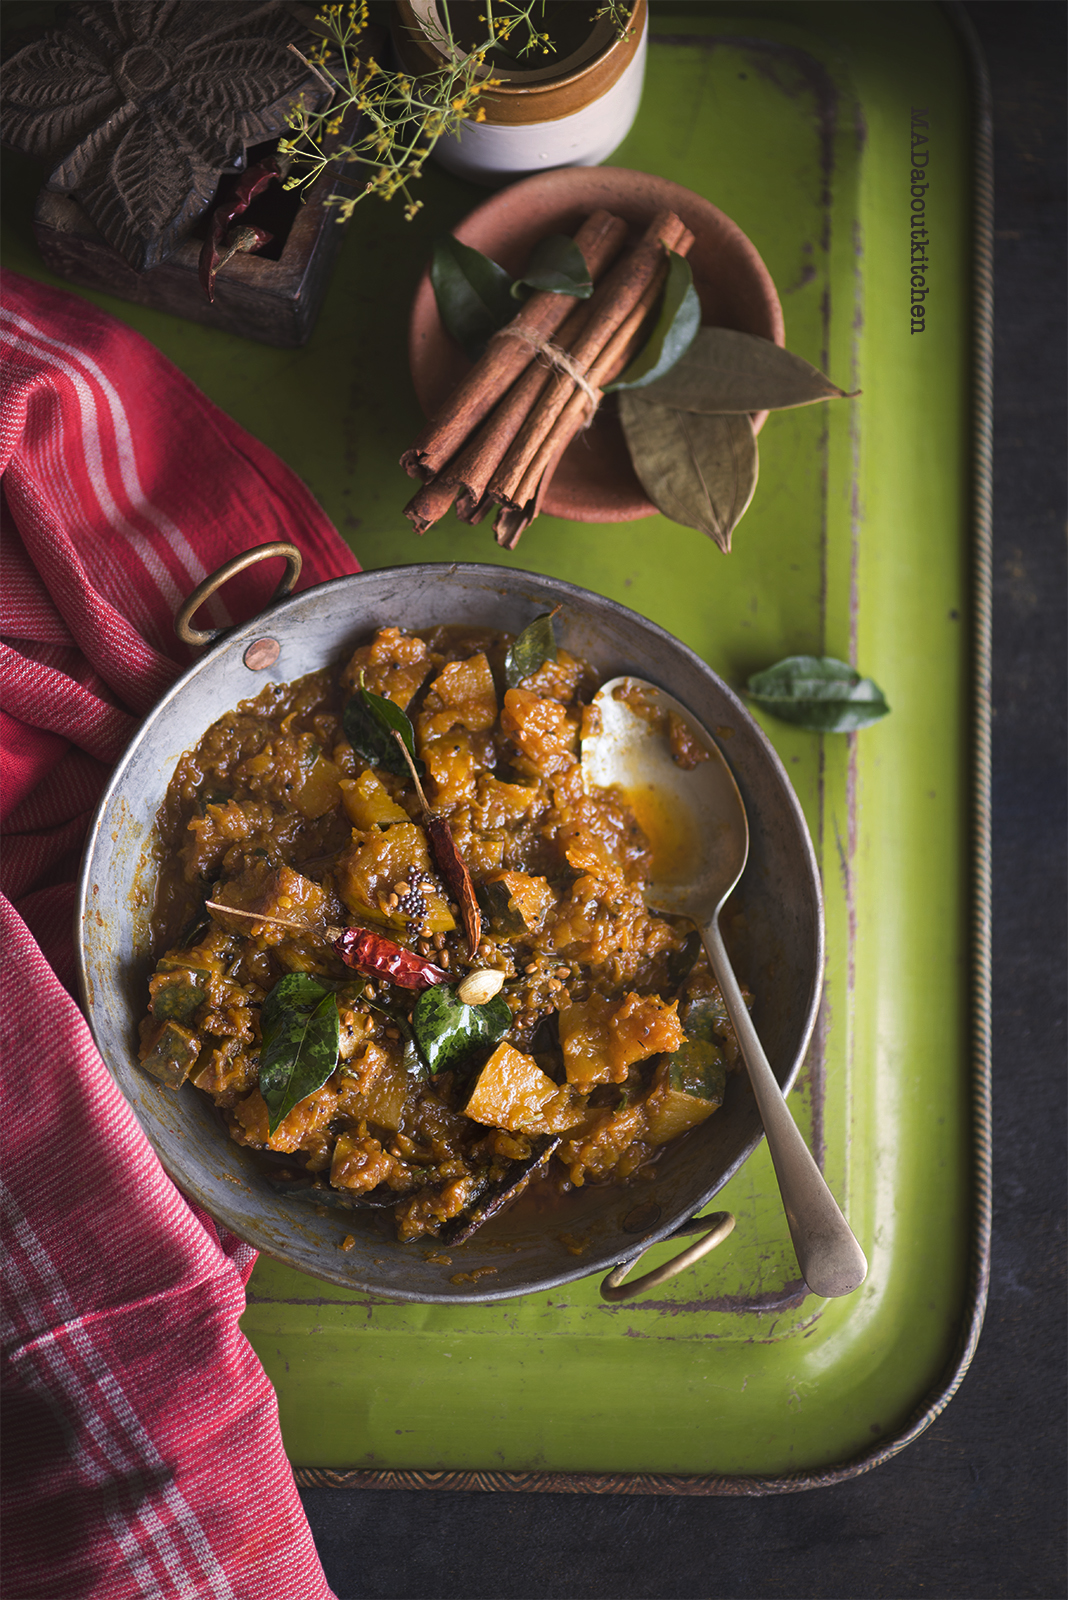 Khatta Meetha Kaddu is an Indian Stir Fry made of Sweet Pumpkin and a whole lot of spices. This stir fry is tangy, sweet and spicy and is usually served with rotis or puris.